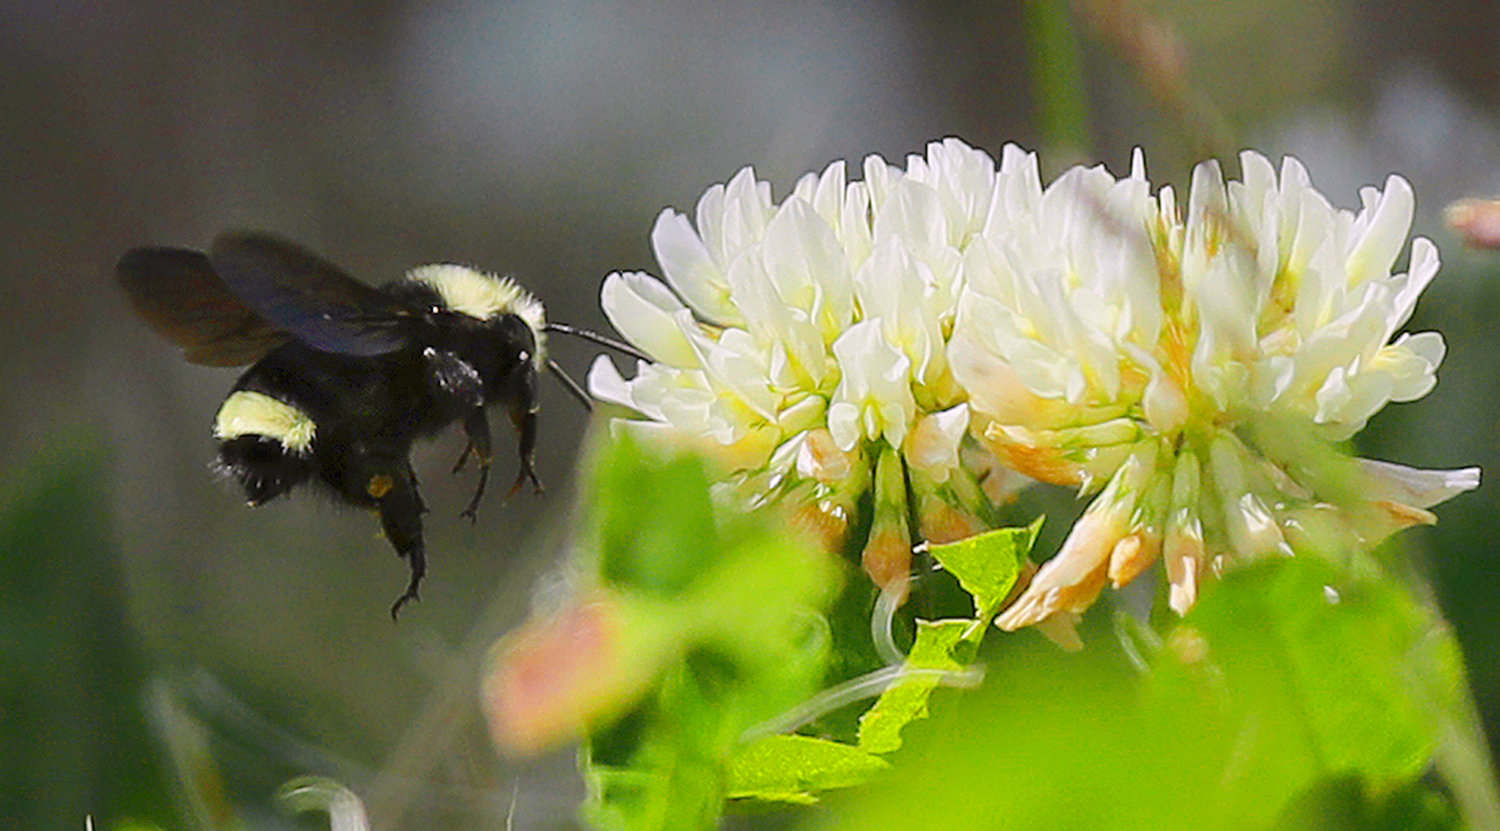 LESS LAWN — A bumblebee flies near clover flowers in Olympia, Wash. You can save money and help pollinators by reducing your lawn footprint.